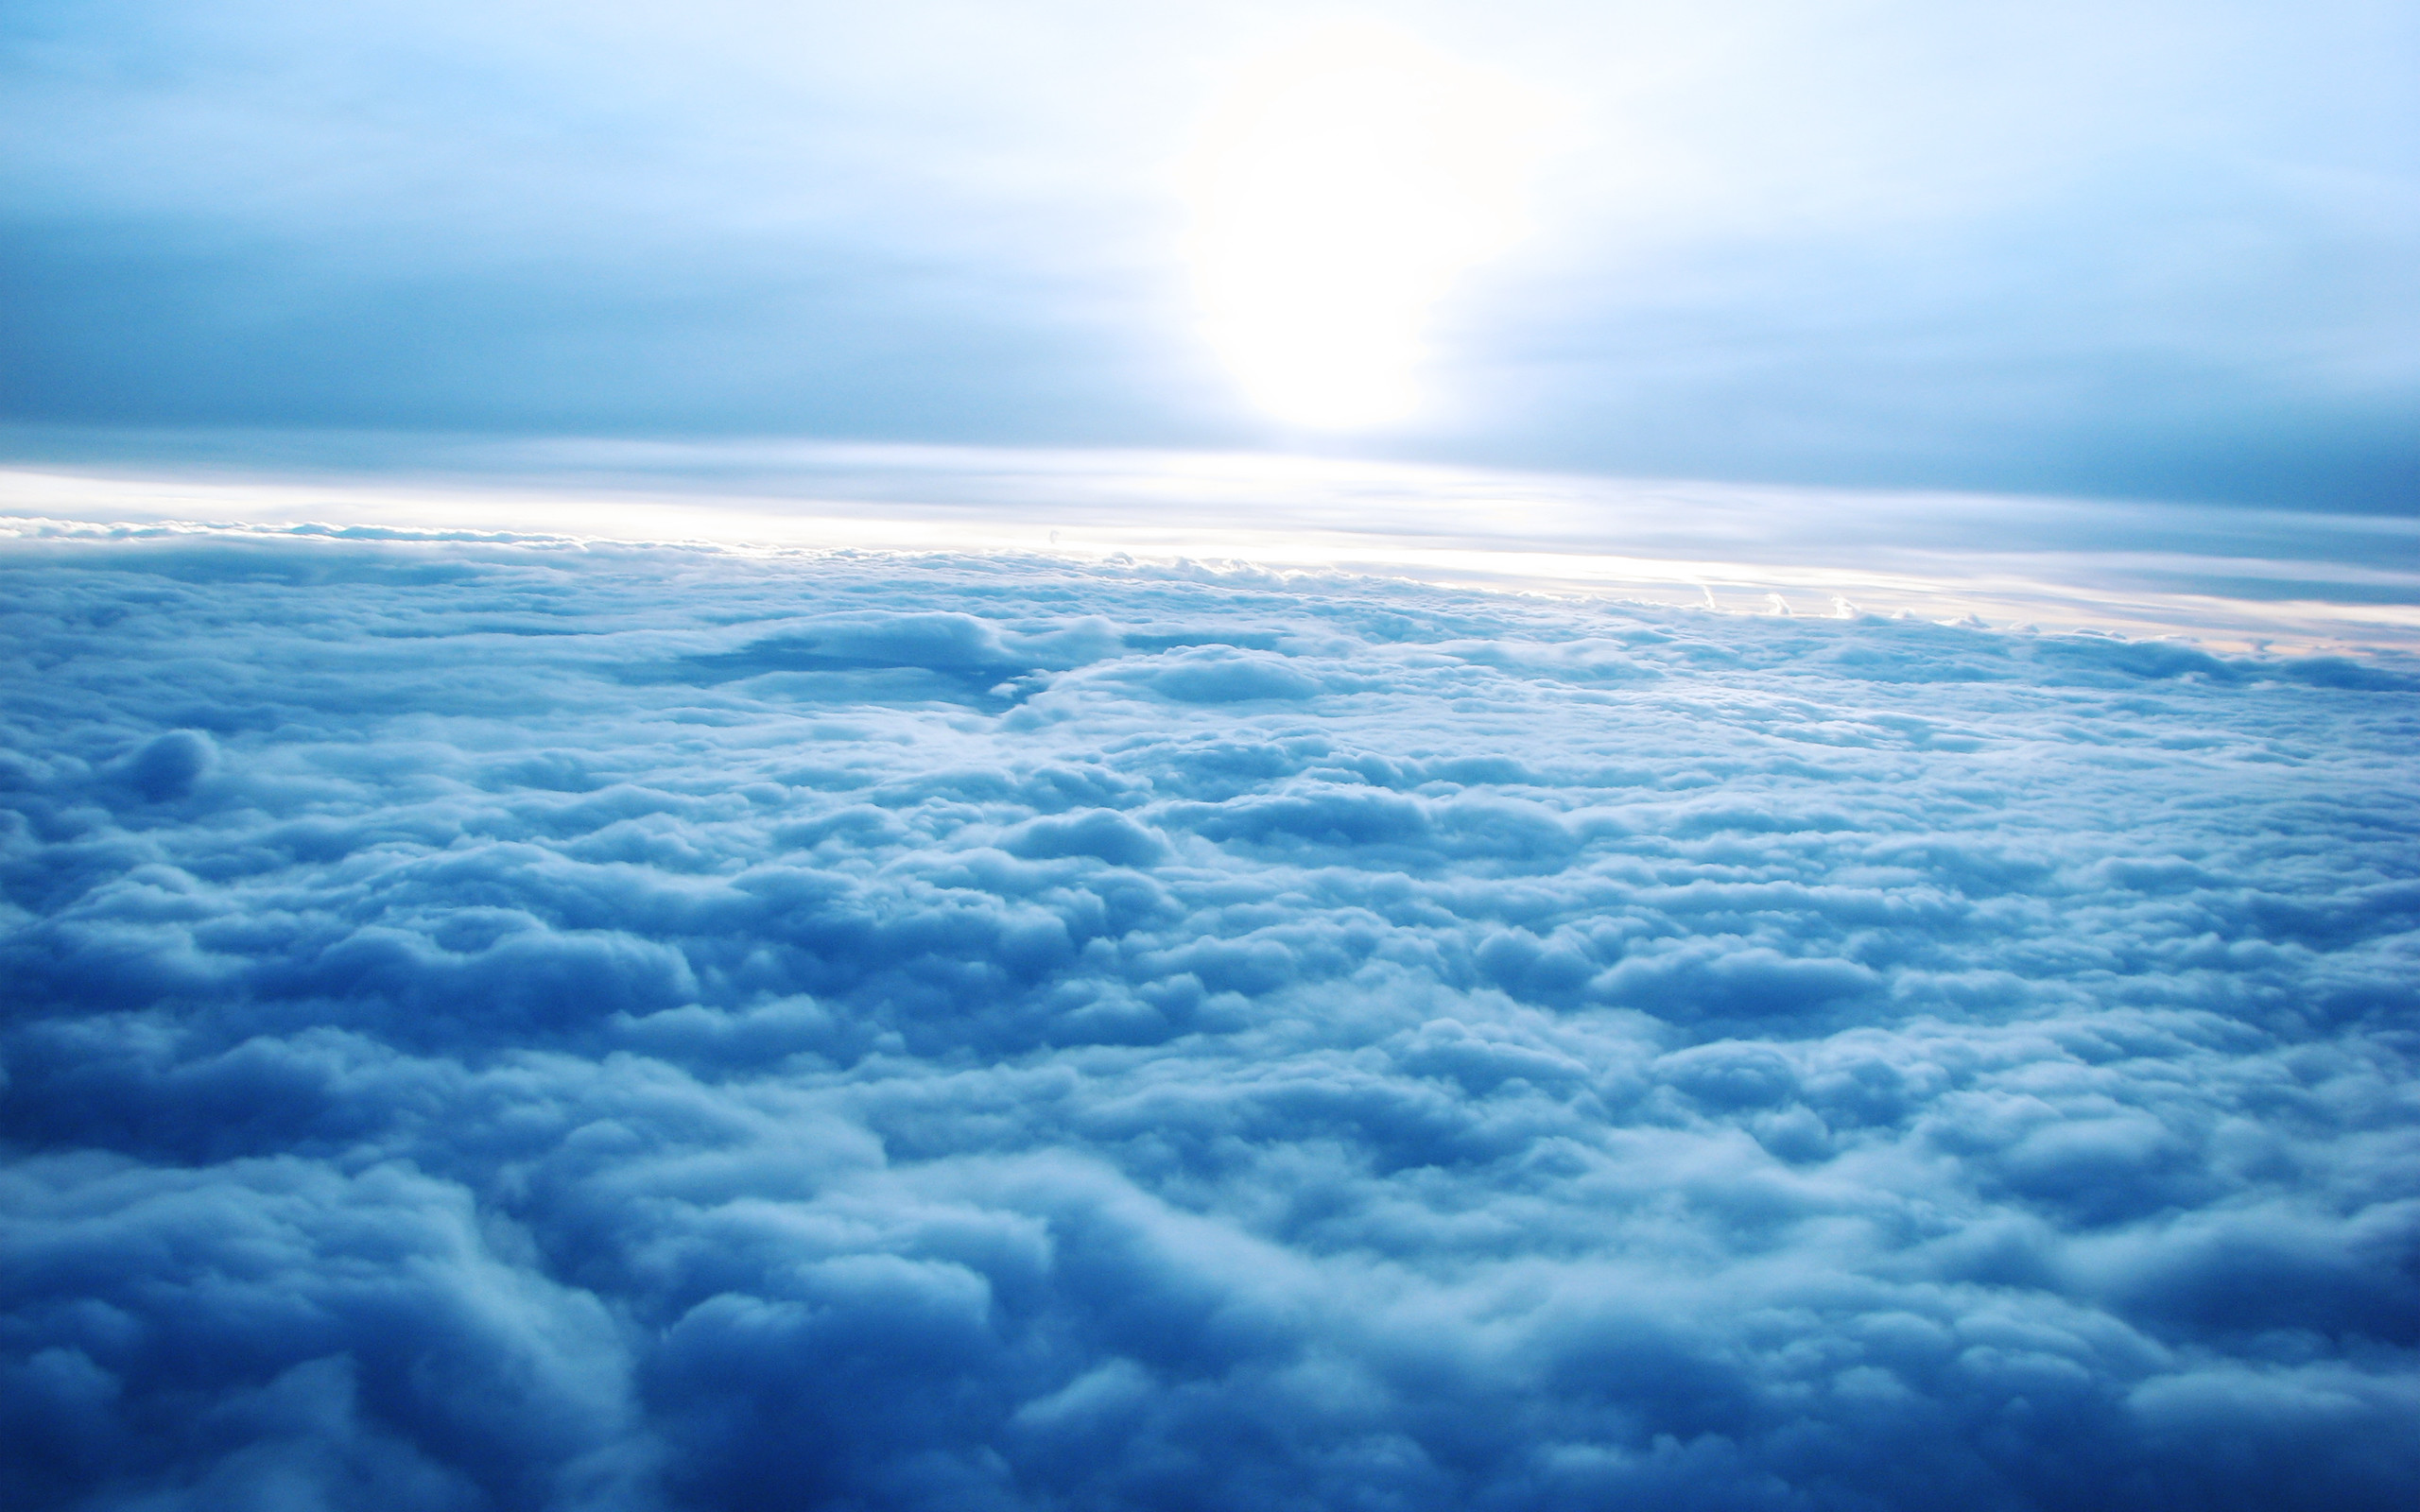 Above The Blue Sky HD wallpaper download in 2560×1600, 1920×1200, 1680×1050, 1440×900,